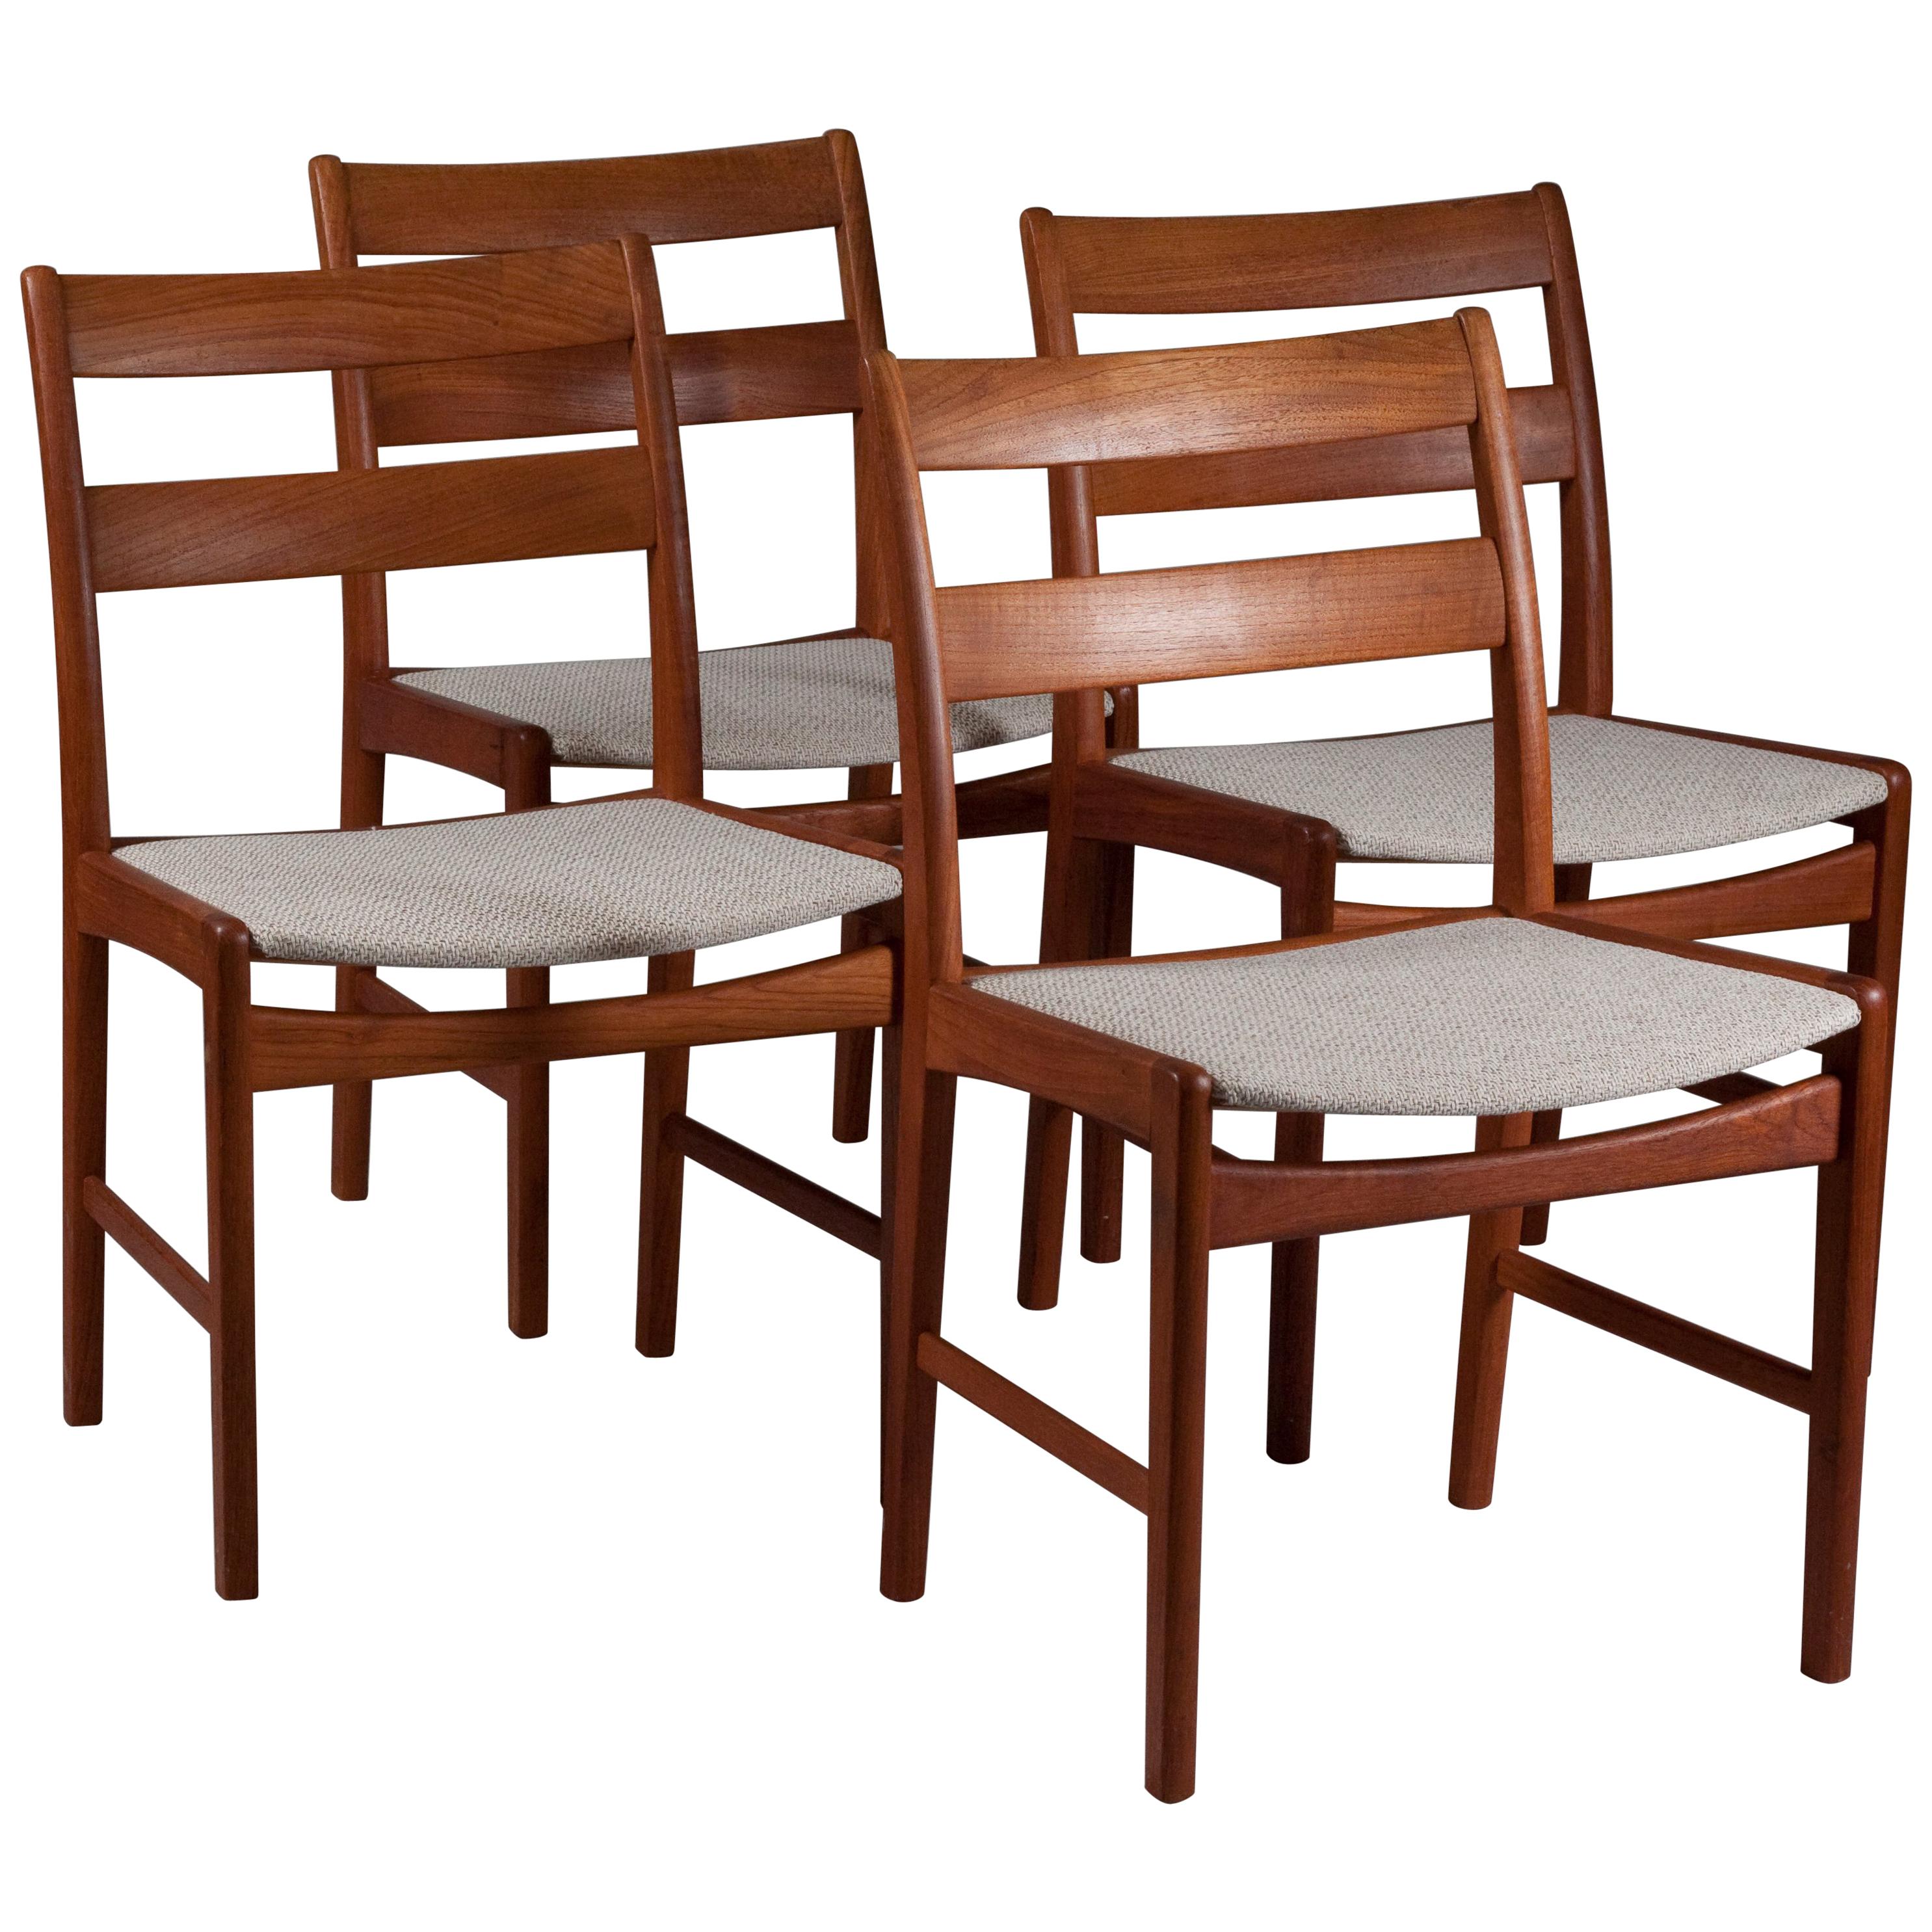 Set of Four Danish Mid-Century Modern Teak Dining Chairs For Sale